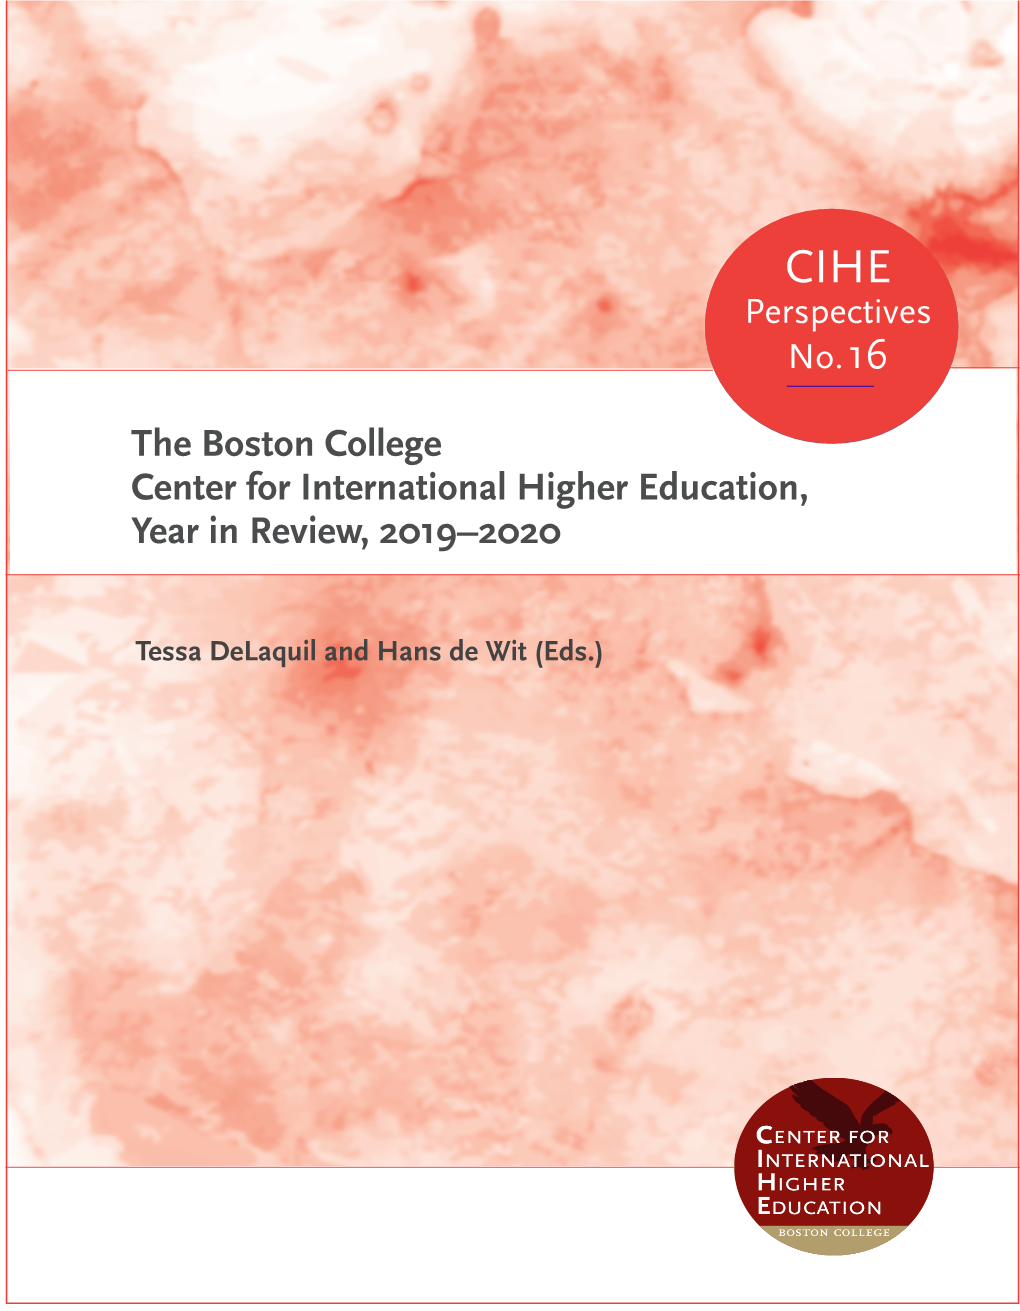 The Boston College Center for International Higher Education, Year in Review, 2019–2020